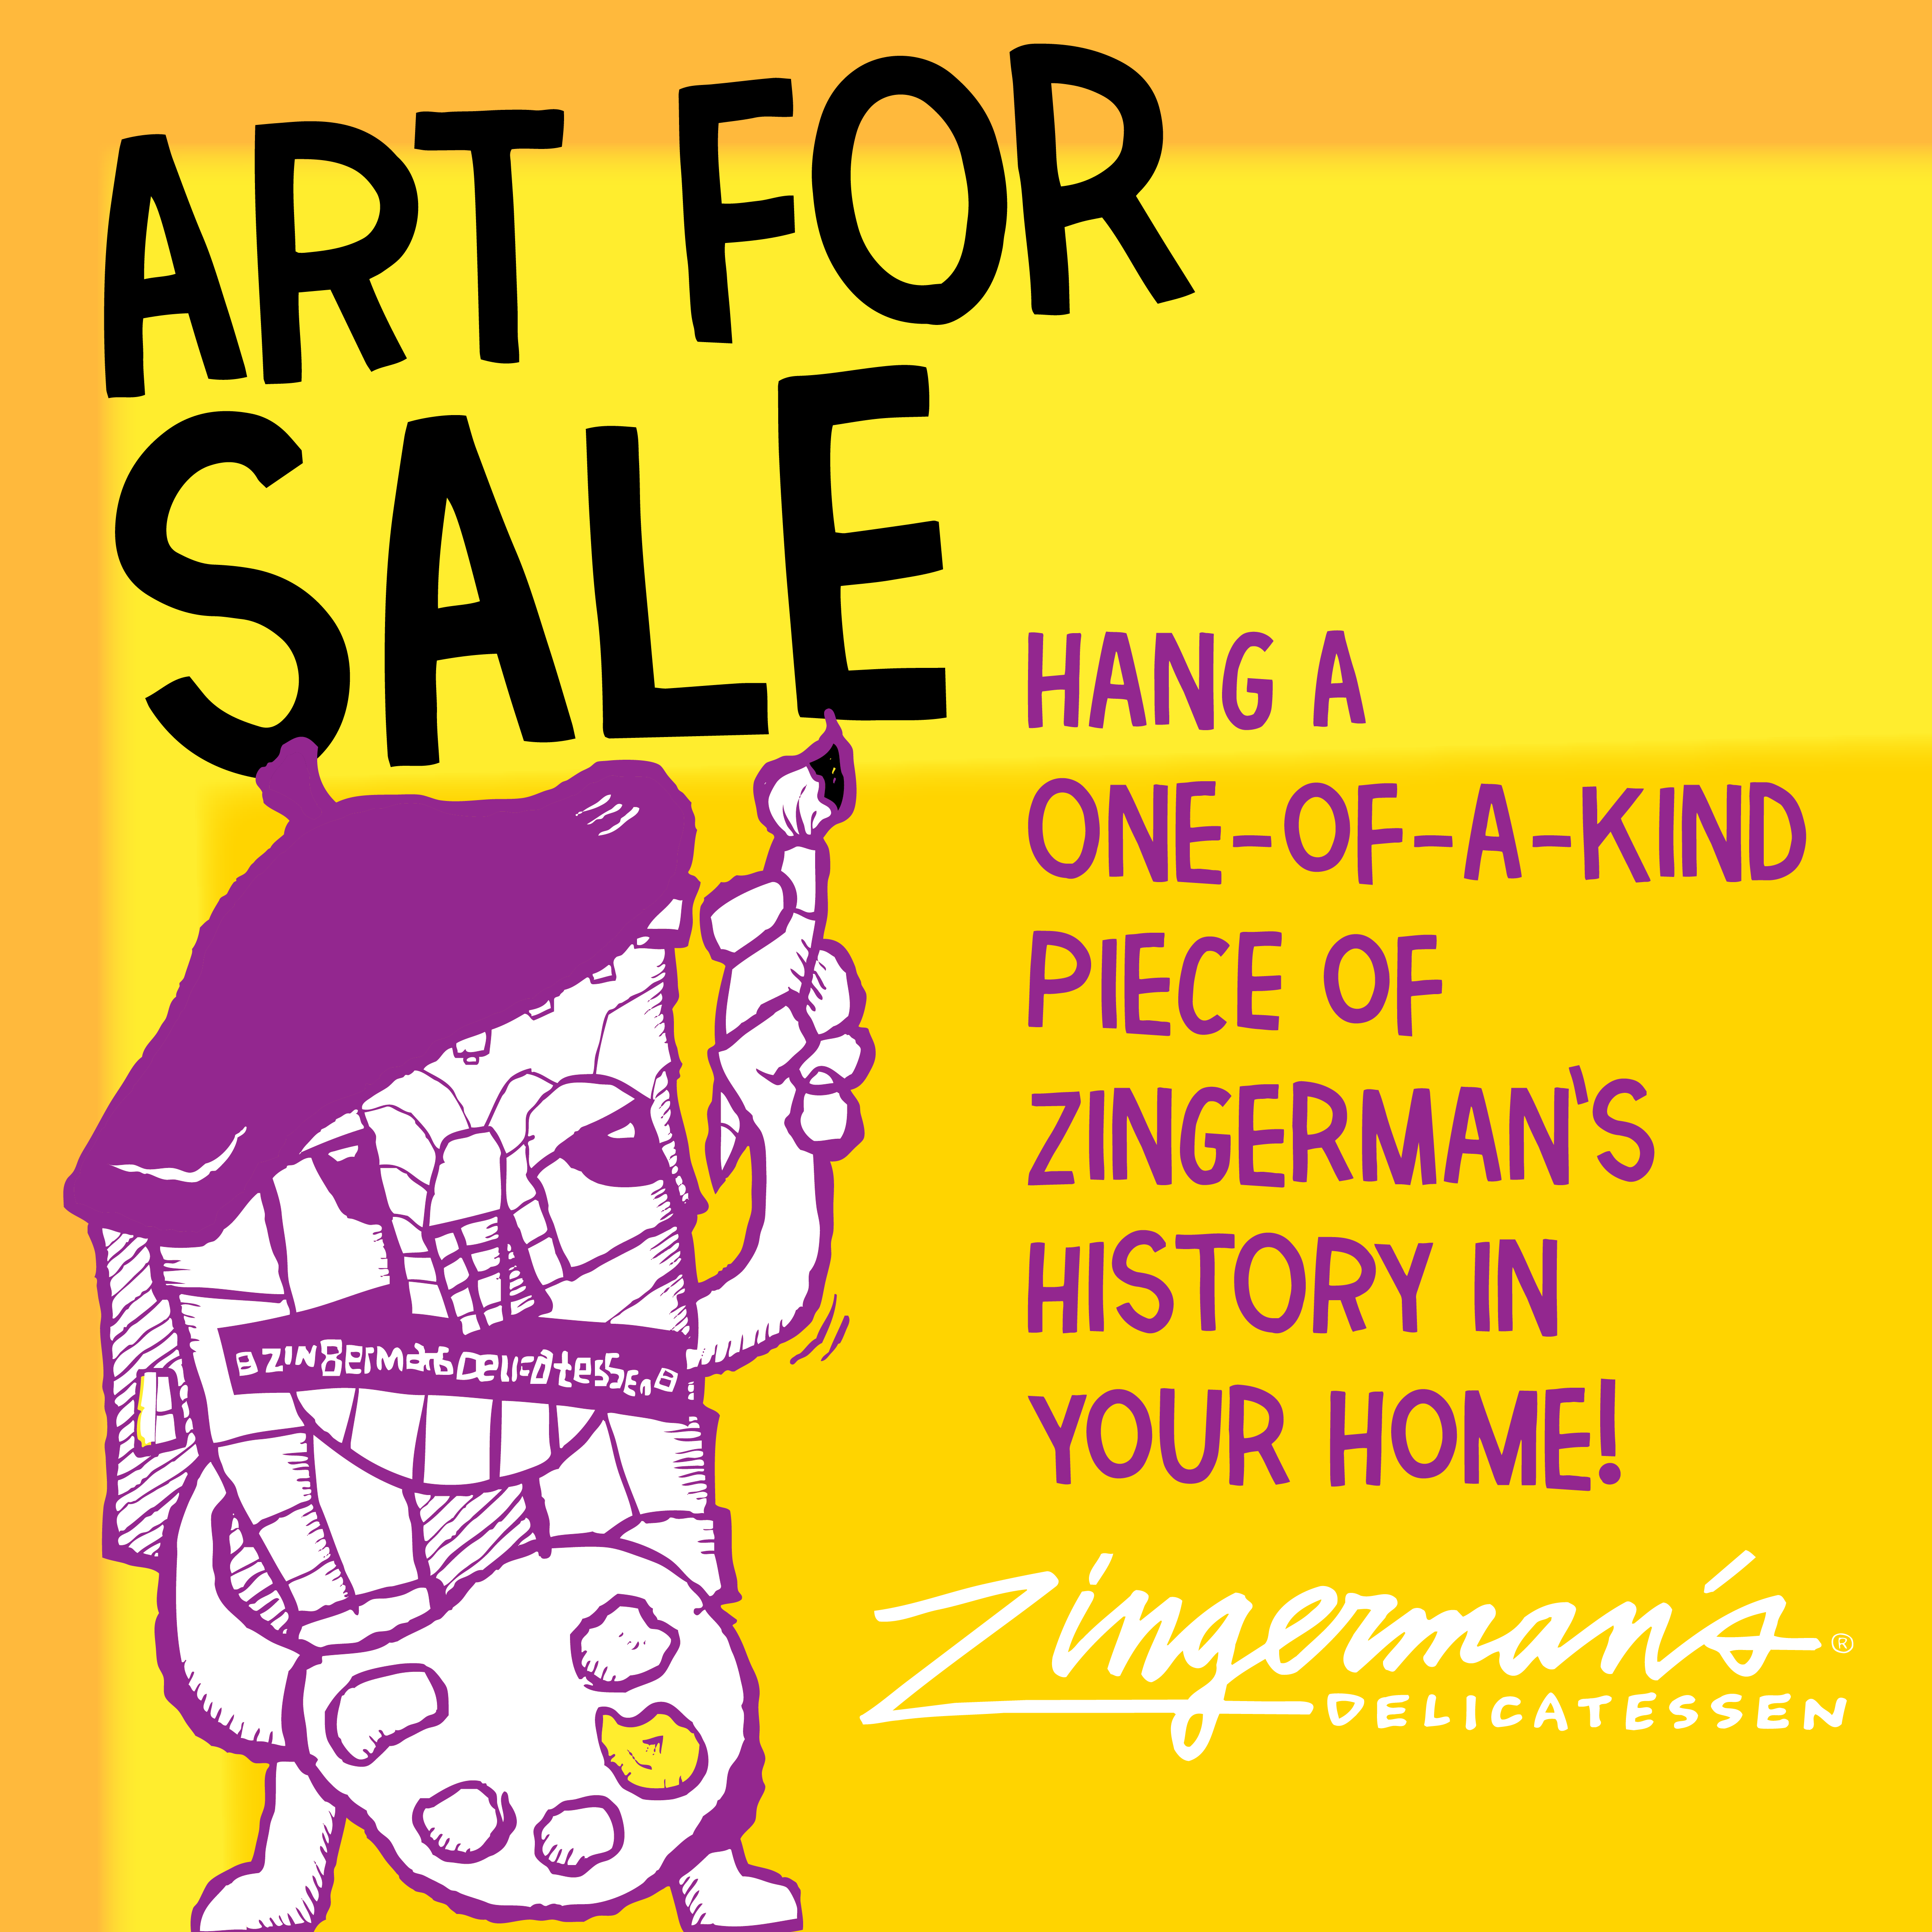 art for sale - hang a one of a kind piece of zingerman's art in your home